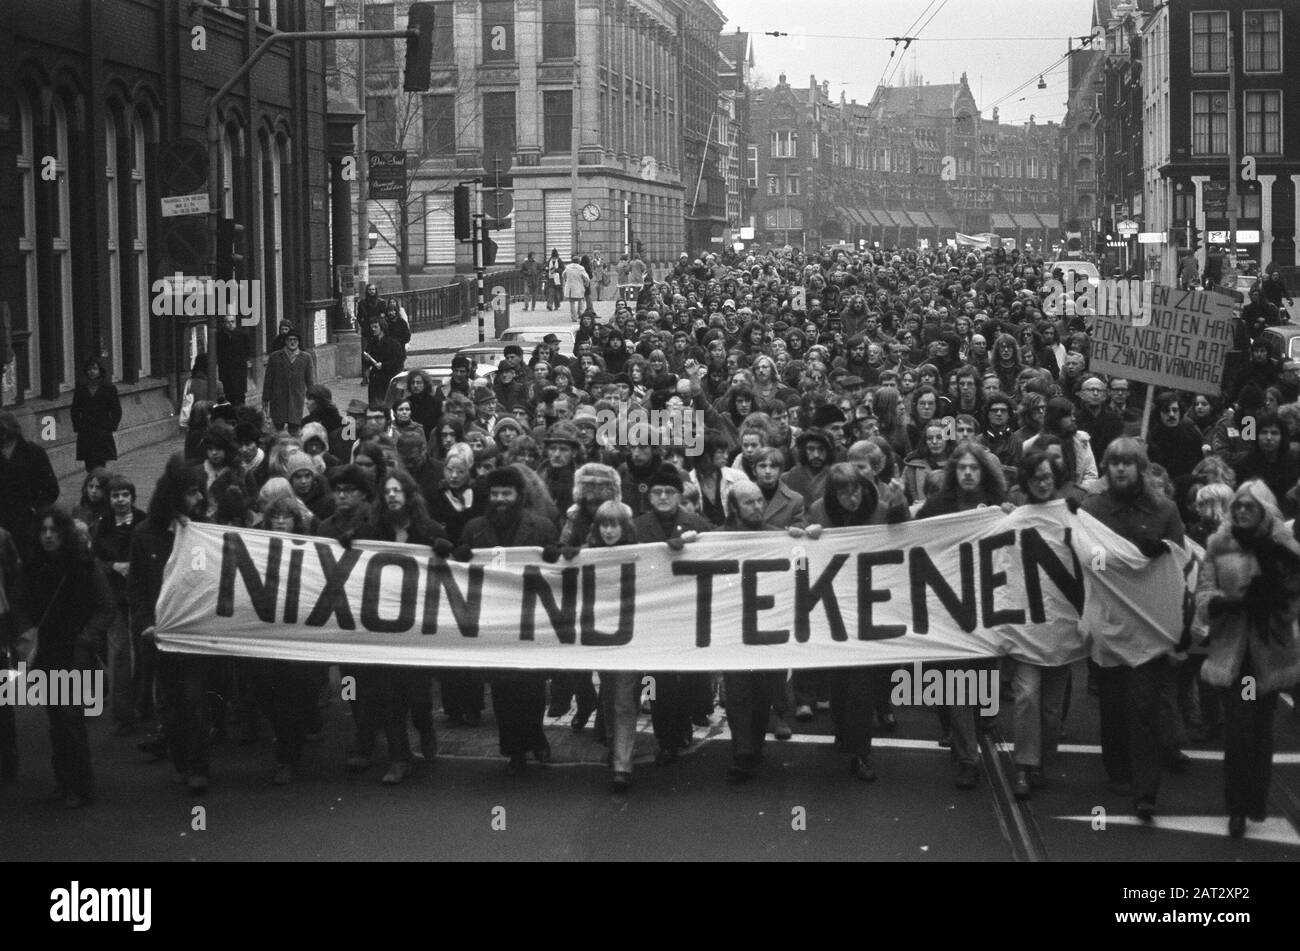 Great demonstration in Amsterdam against the Vietnam war, demonstrators  with banner 'Nixon now drawing' Date: 23 December 1972 Location: Amsterdam,  Noord-Holland Keywords: demonstrations, wars , banners Stock Photo - Alamy